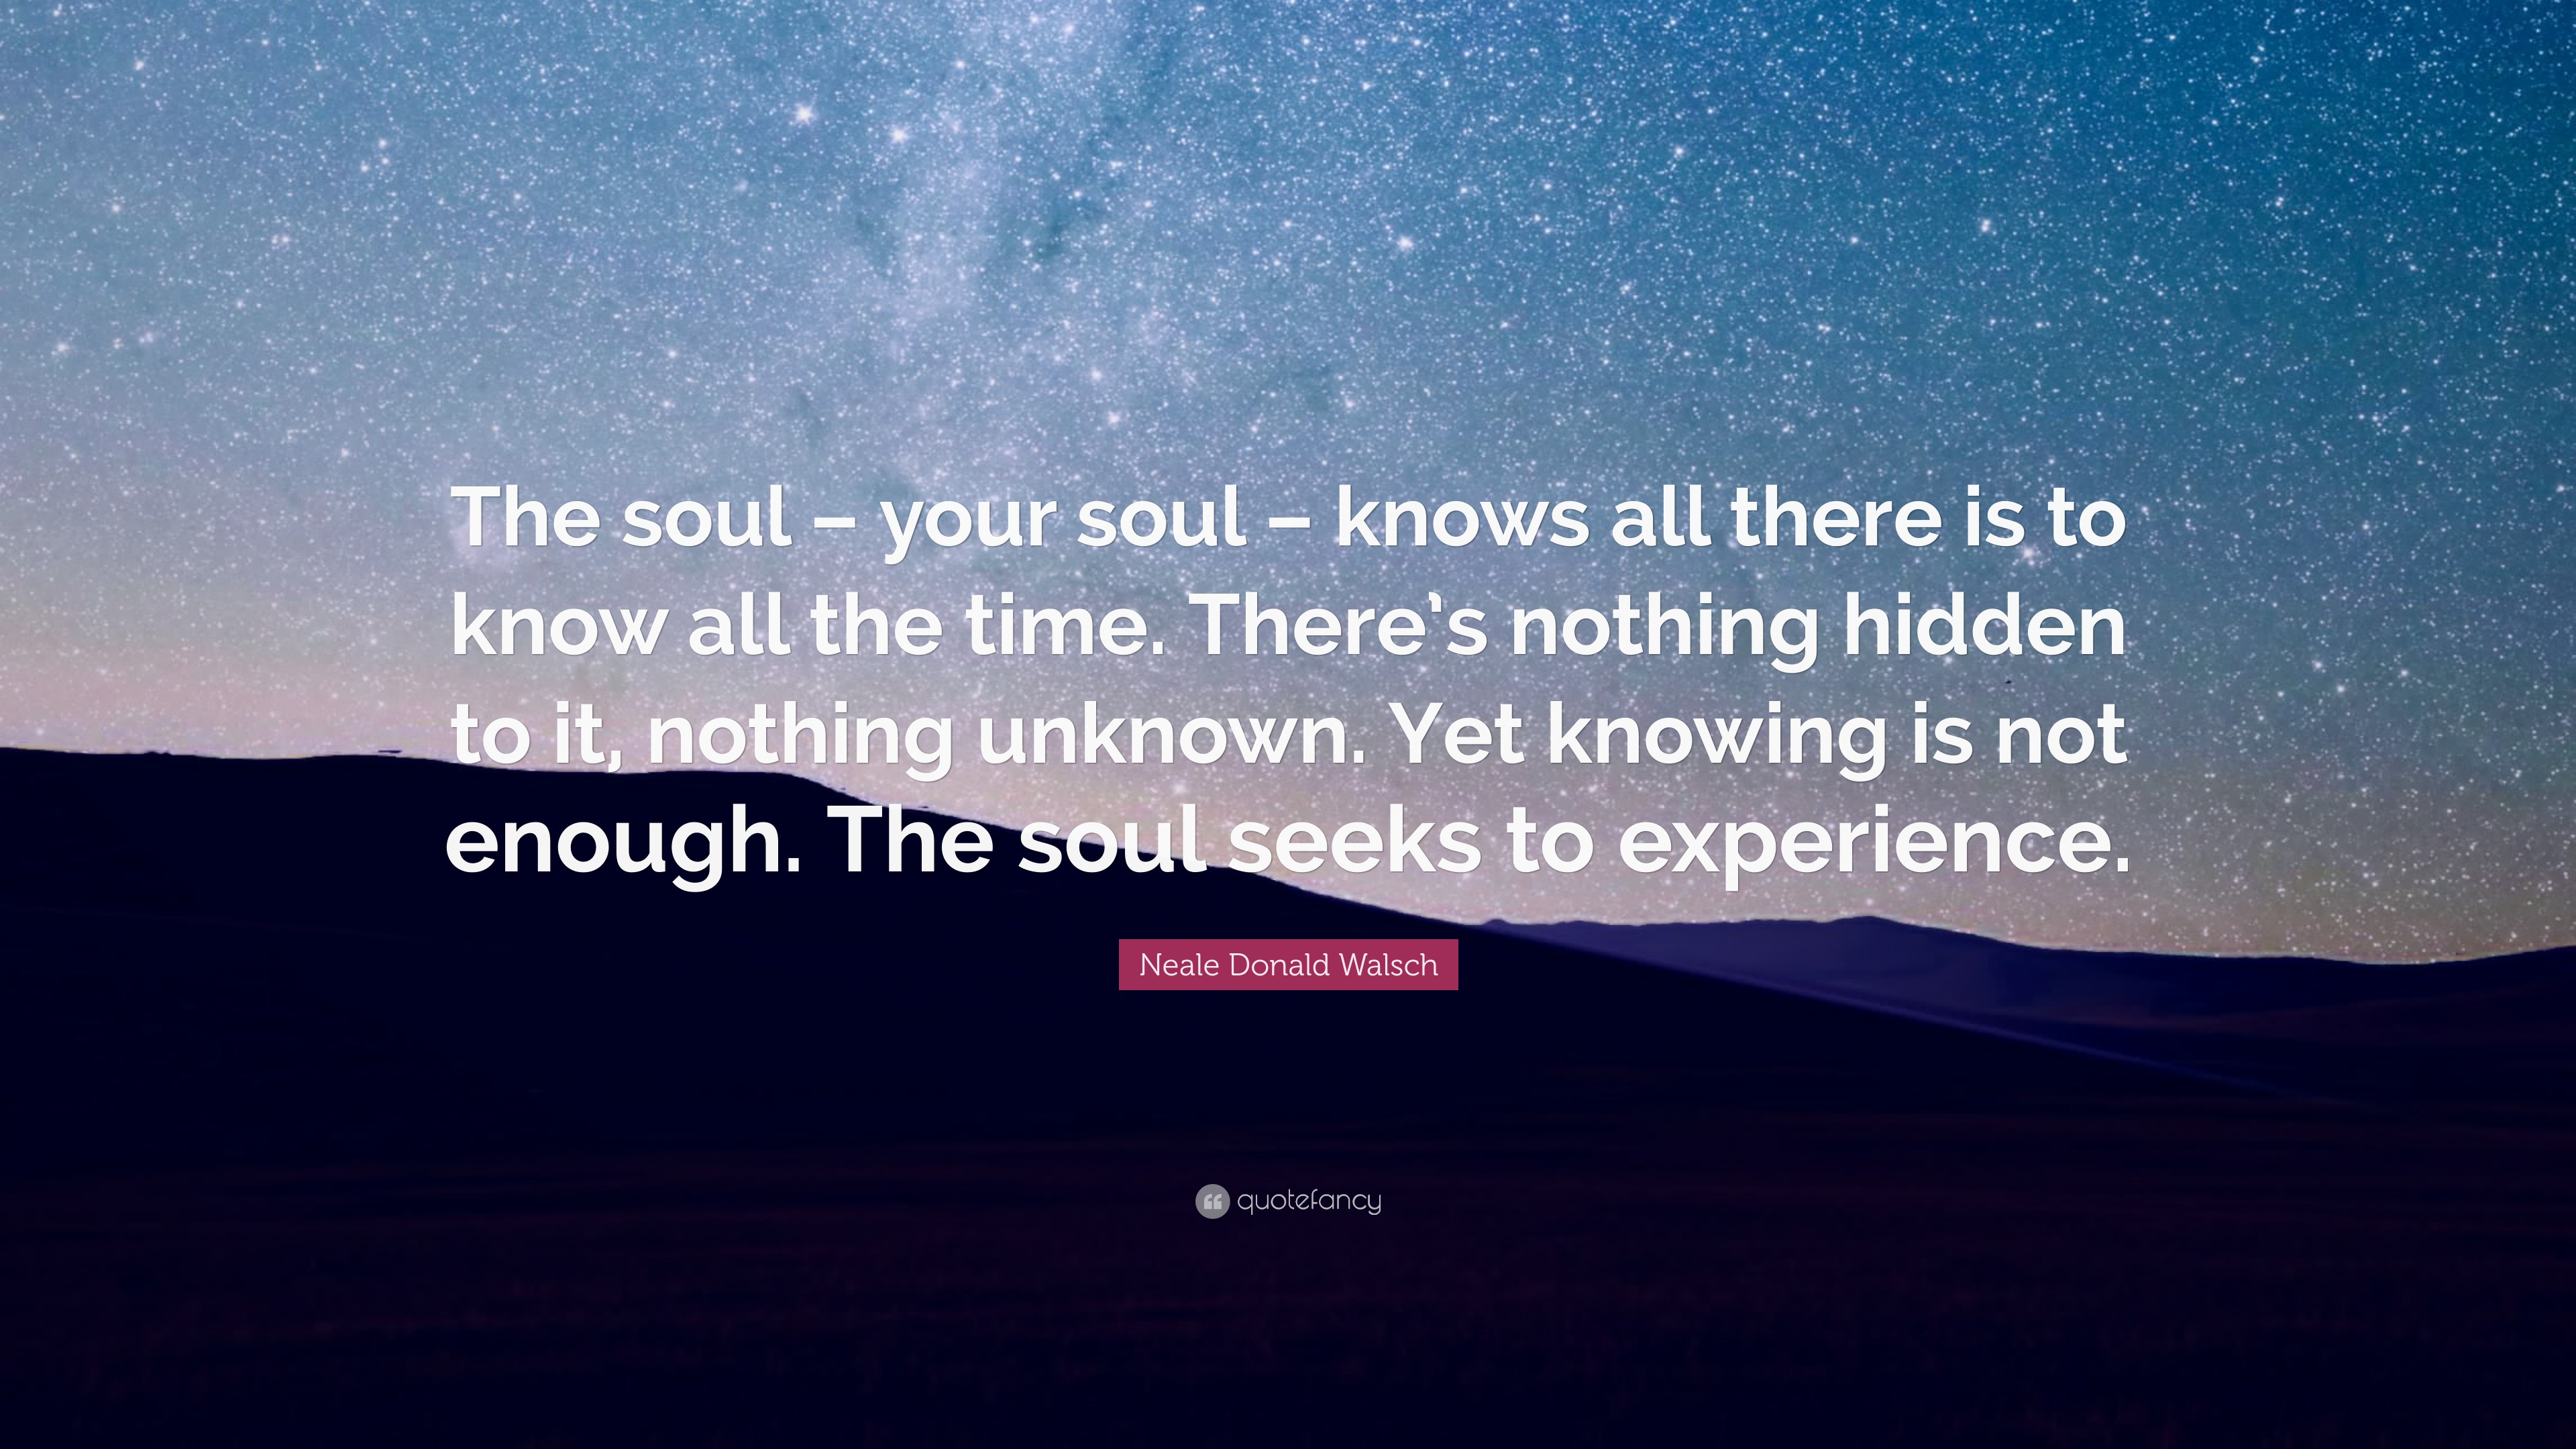 Neale Donald Walsch Quote: “The soul – your soul – knows all there is ...